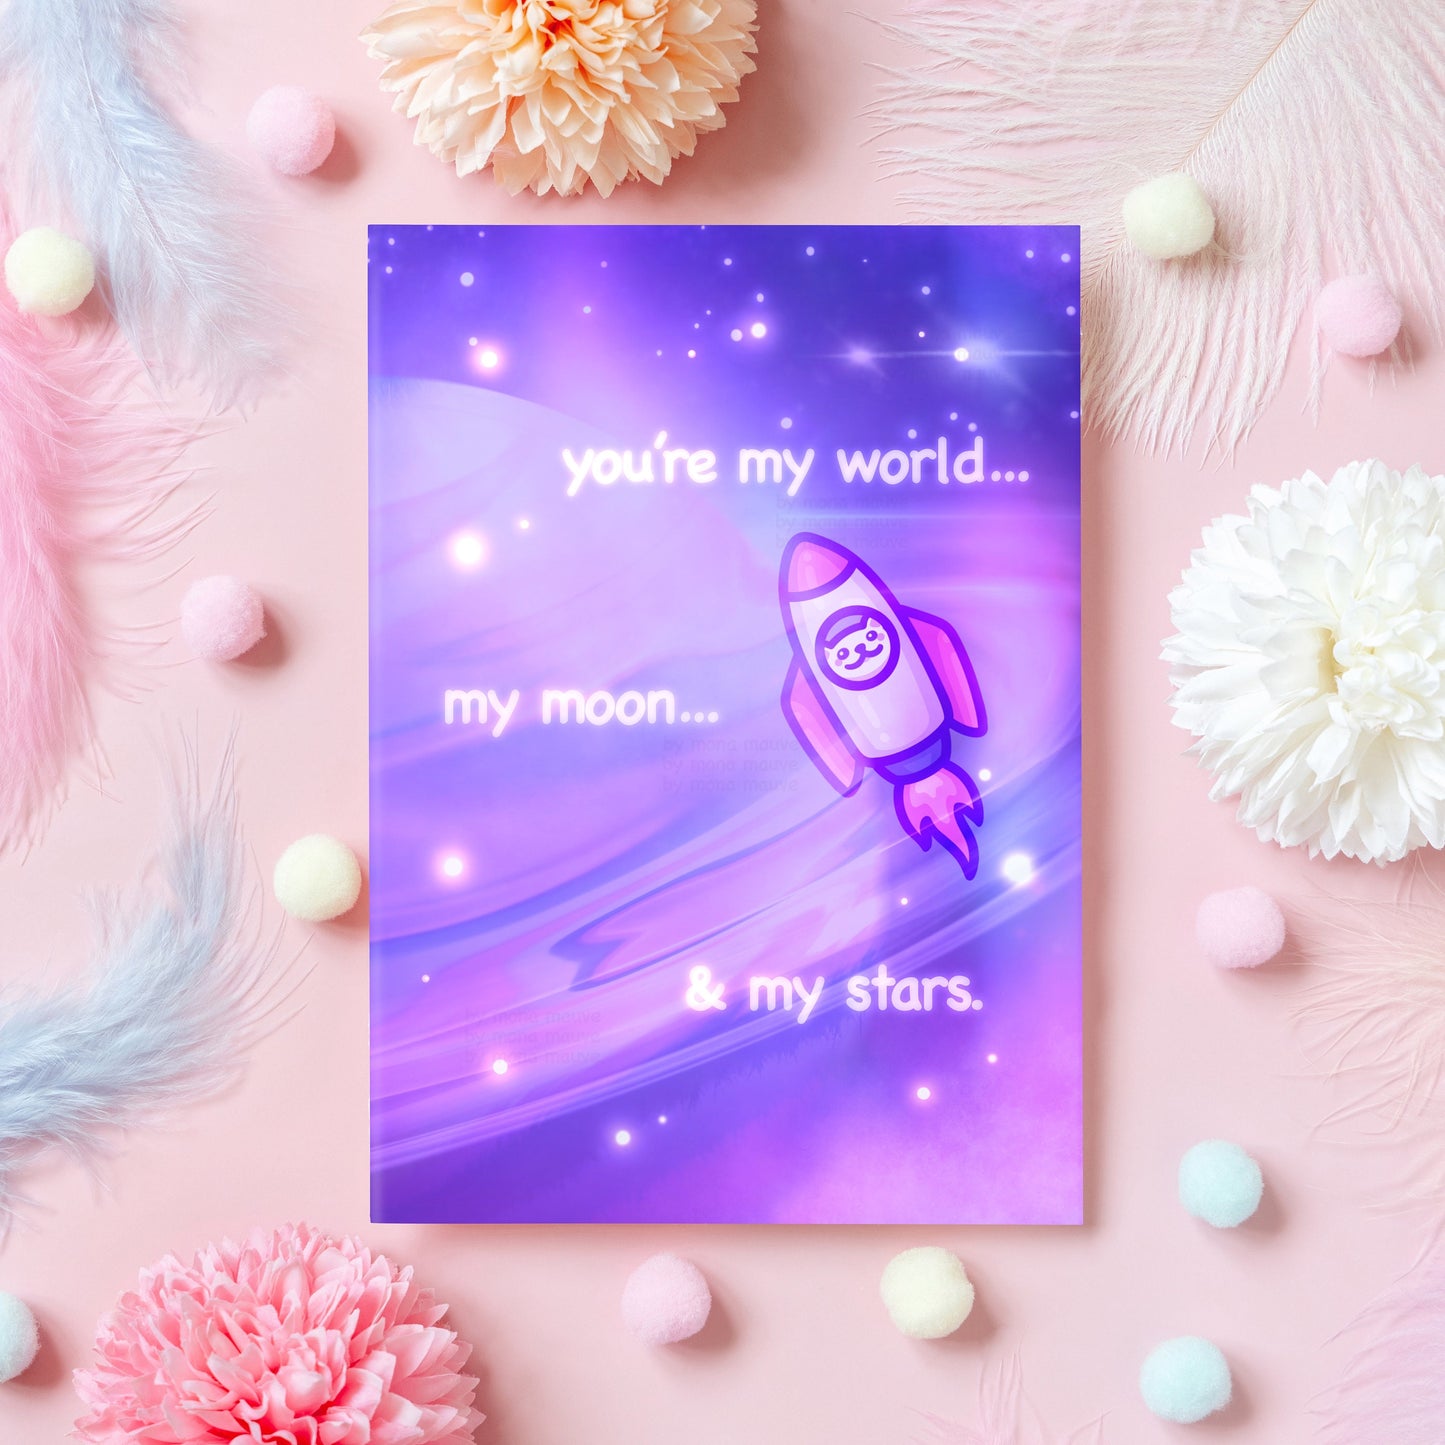 Cute Space Cat Anniversary Card | My World, My Moon & My Stars | Wedding or Dating Anniversary | For Husband, Wife, Boyfriend - Her or Him